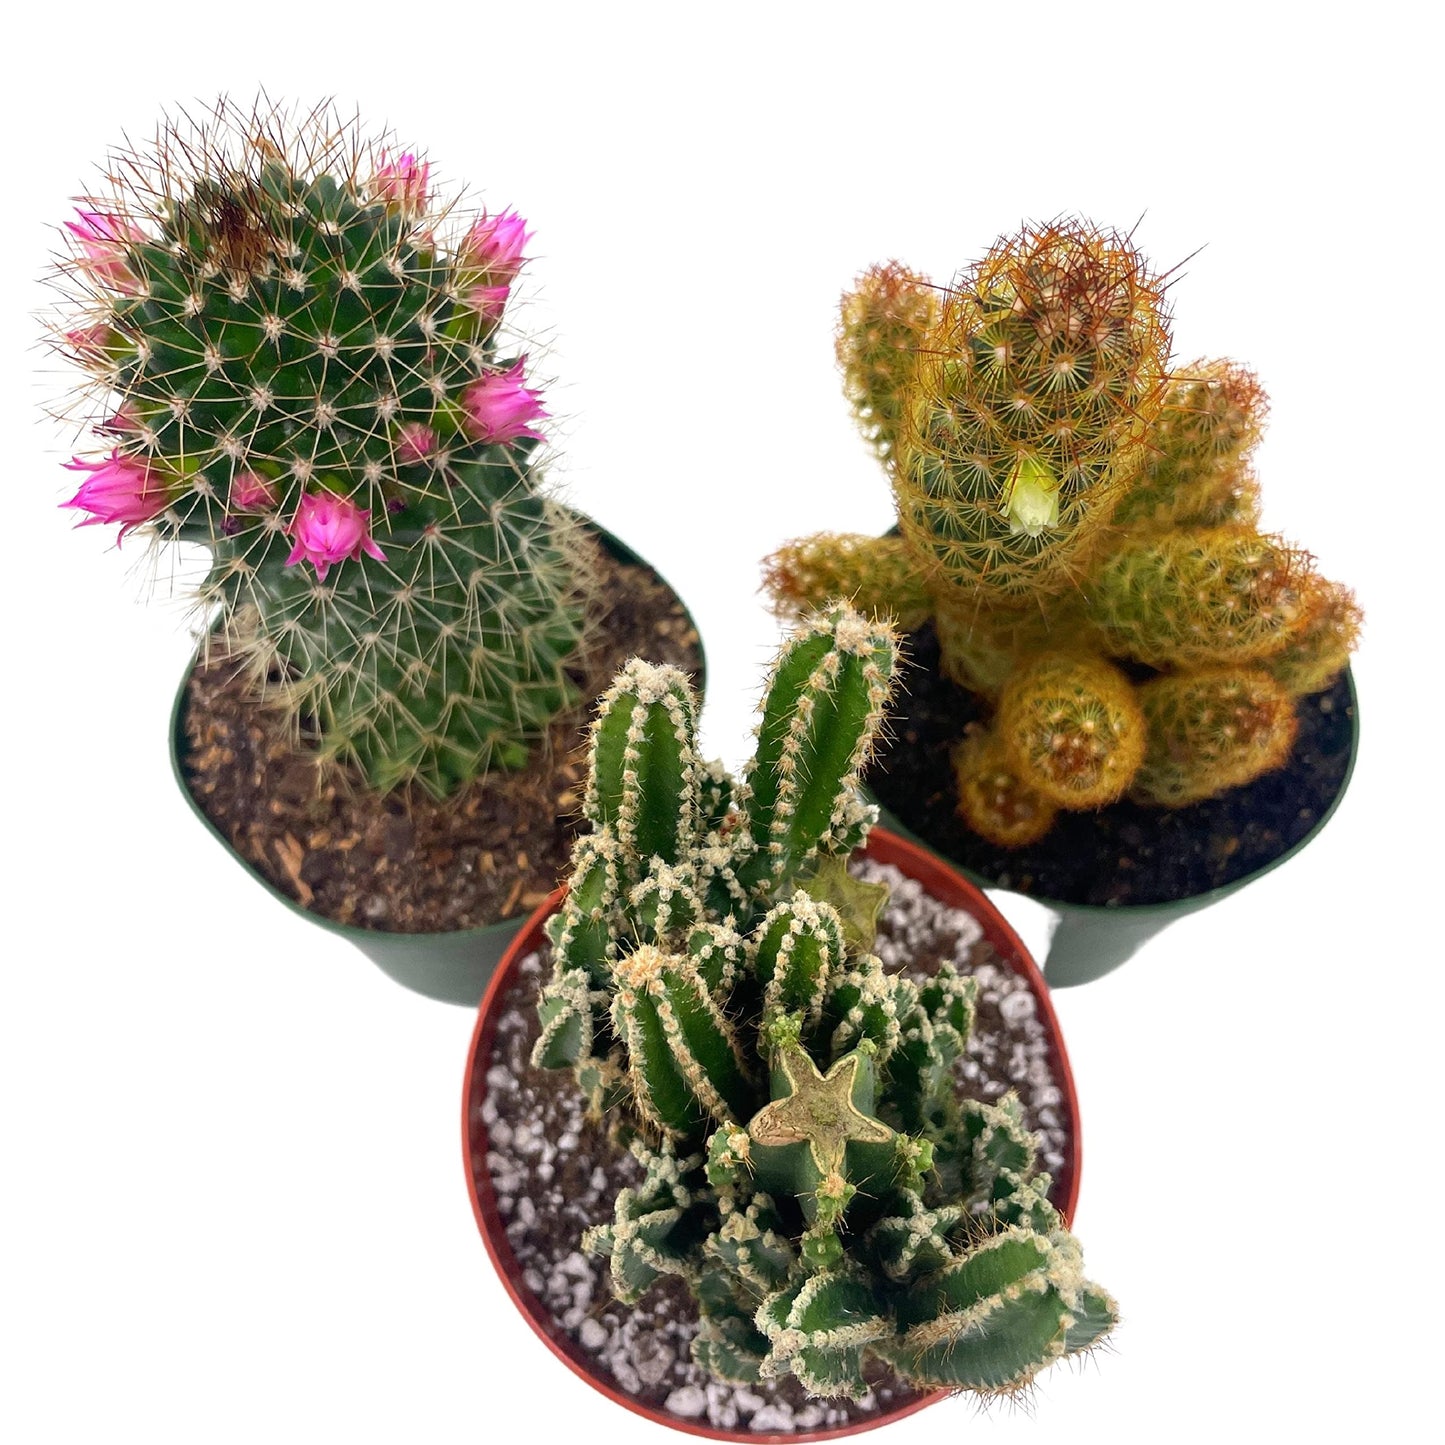 BubbleBlooms Cactus Assortment, 4 inch Set of 3, Best-Sellers Most Popular Cacti Variety